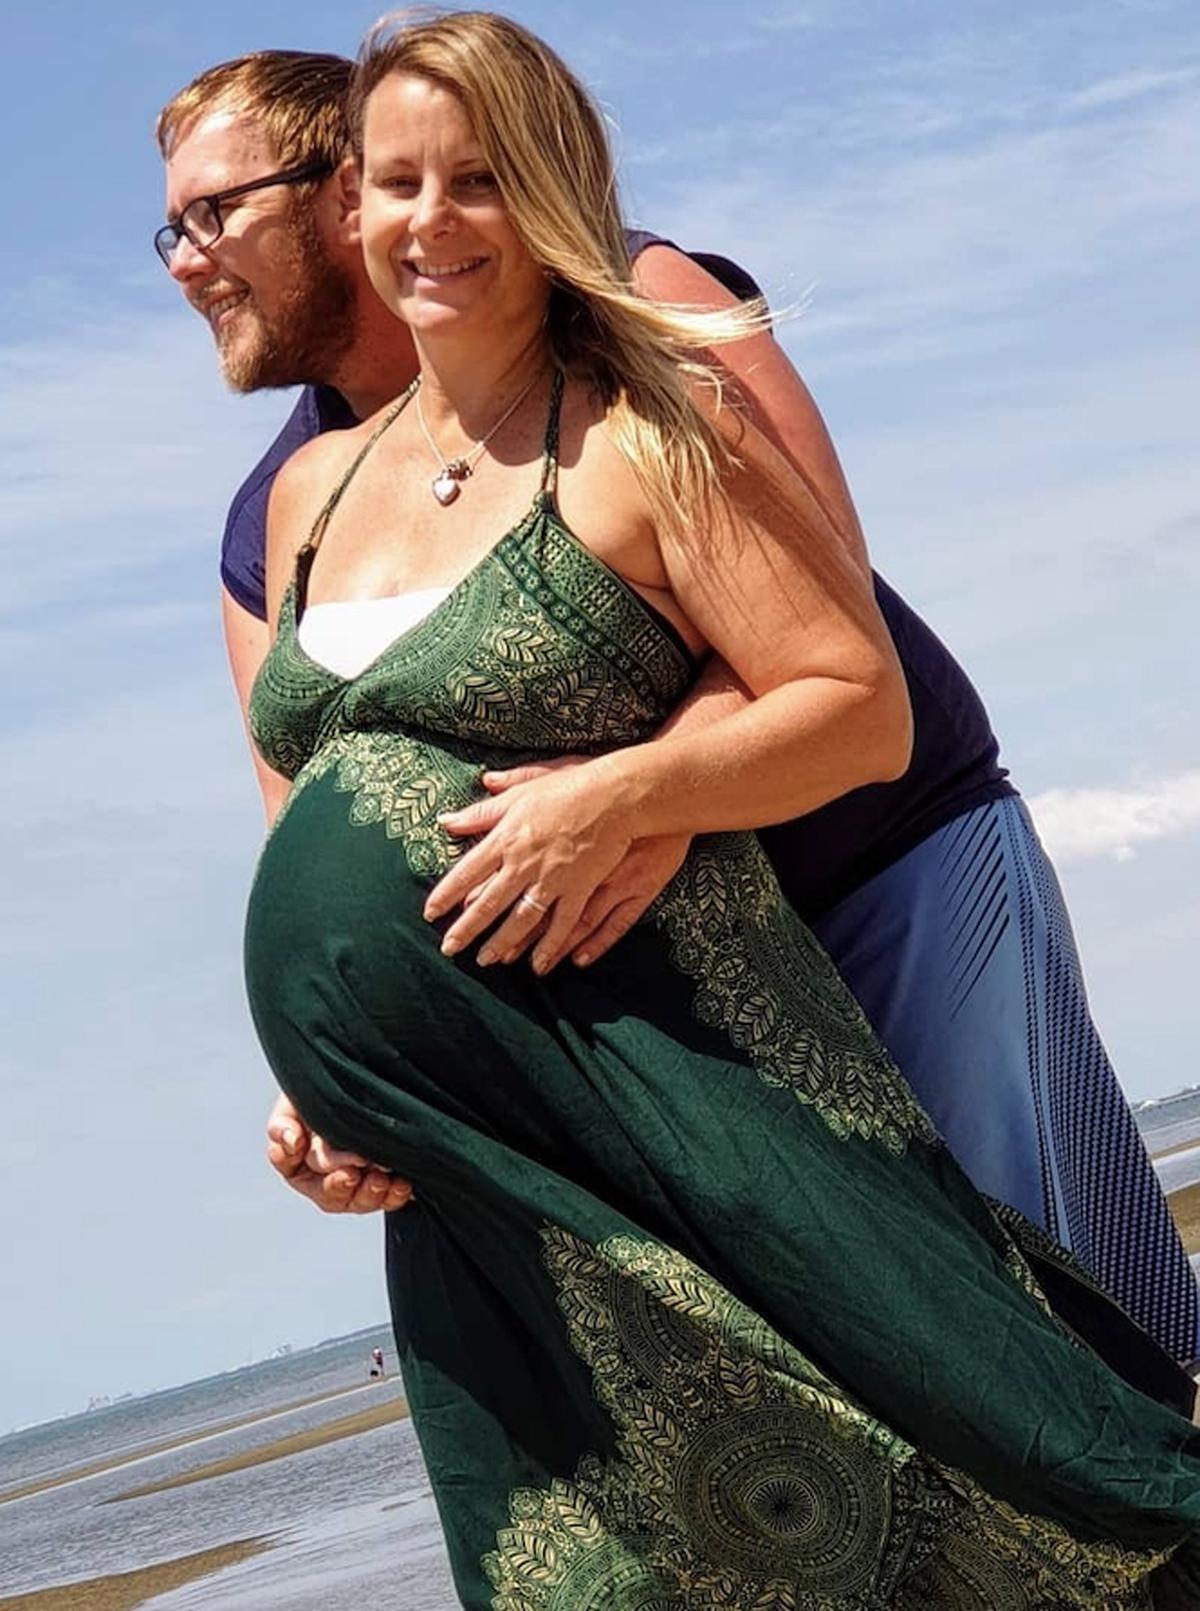  Adam with his wife, Dinah, when she was around 30 weeks pregnant with their daughter Brianna. (Caters News)